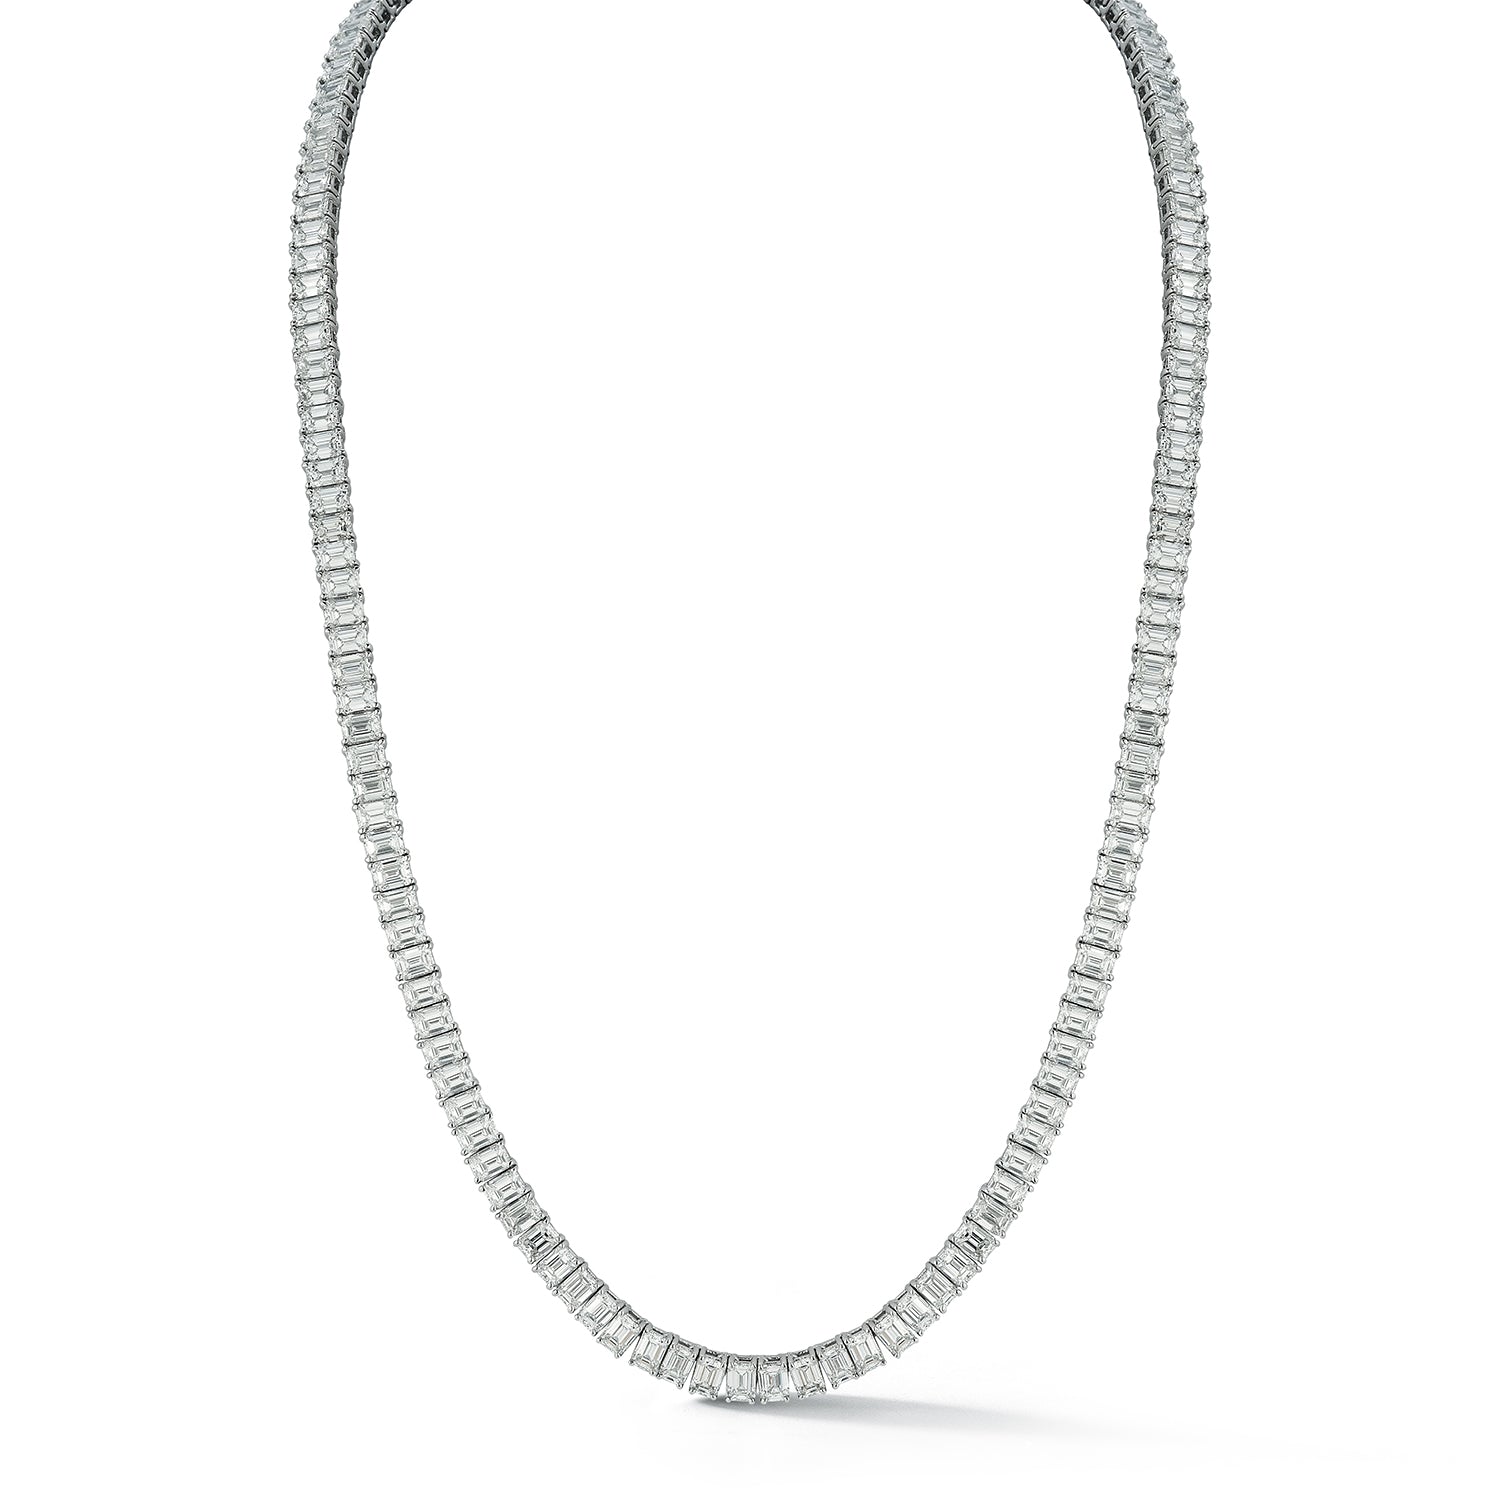 Brilliant and Stunning Diamond necklace from The Golden Jeweler Boutique, where you go to shop for luxury jewelry.